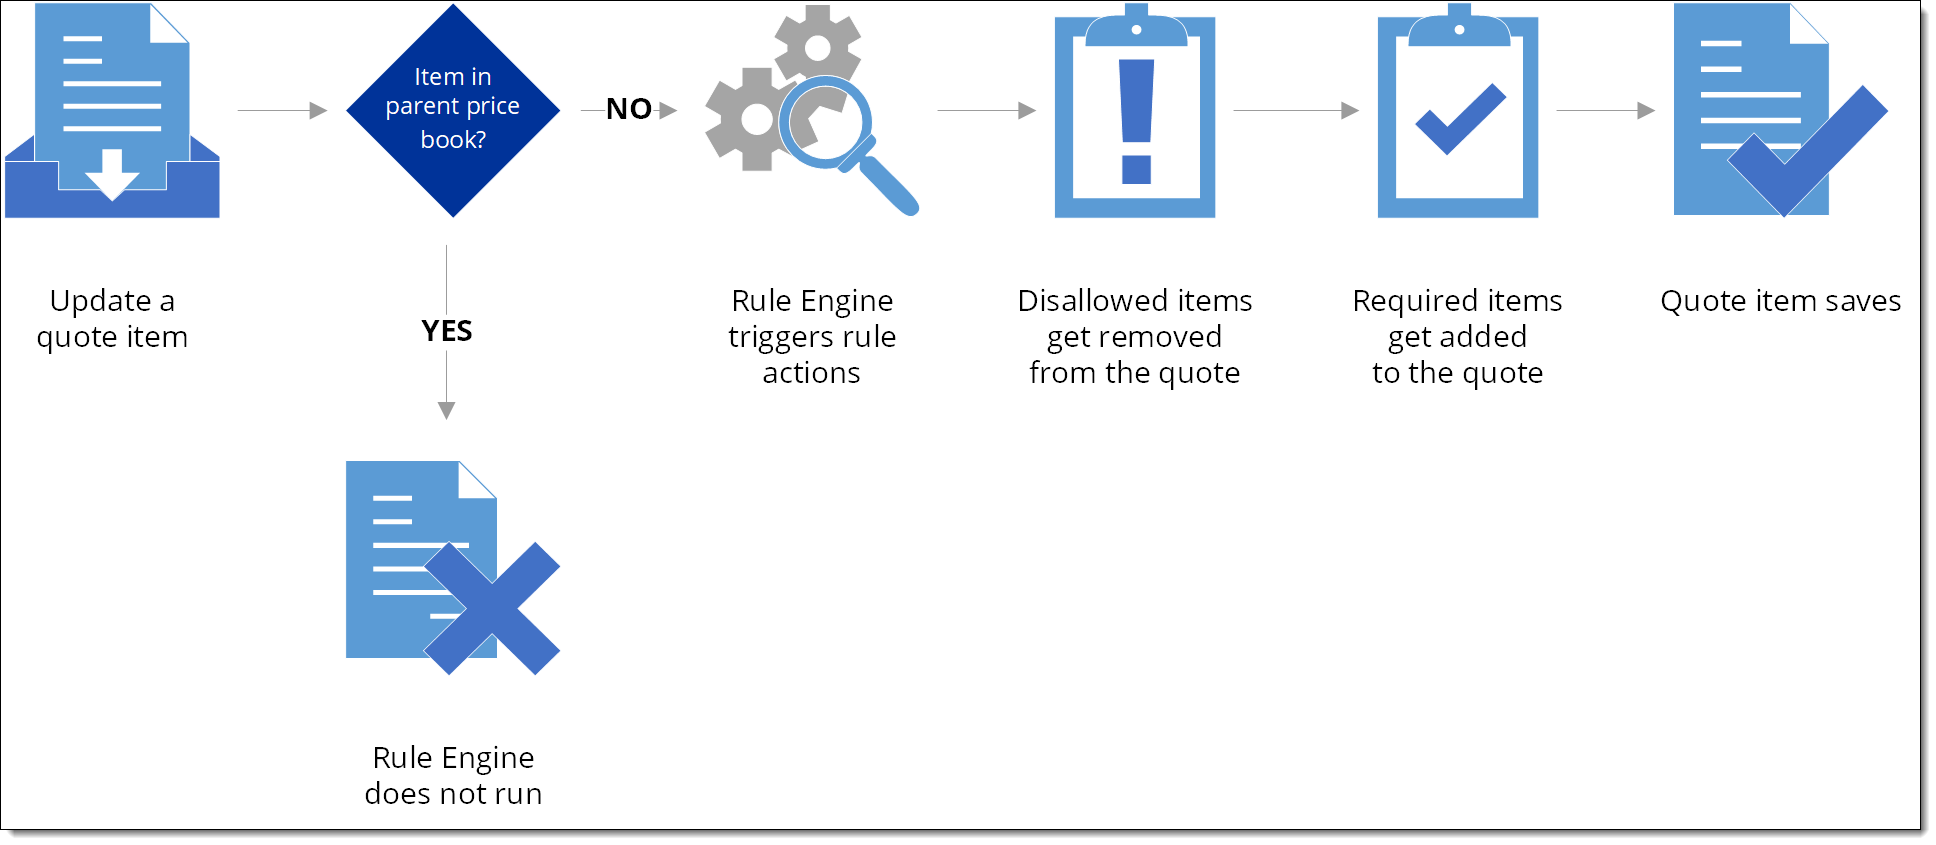 Graphic showing the rule engine process when updating a quote item in FieldFX Mobile